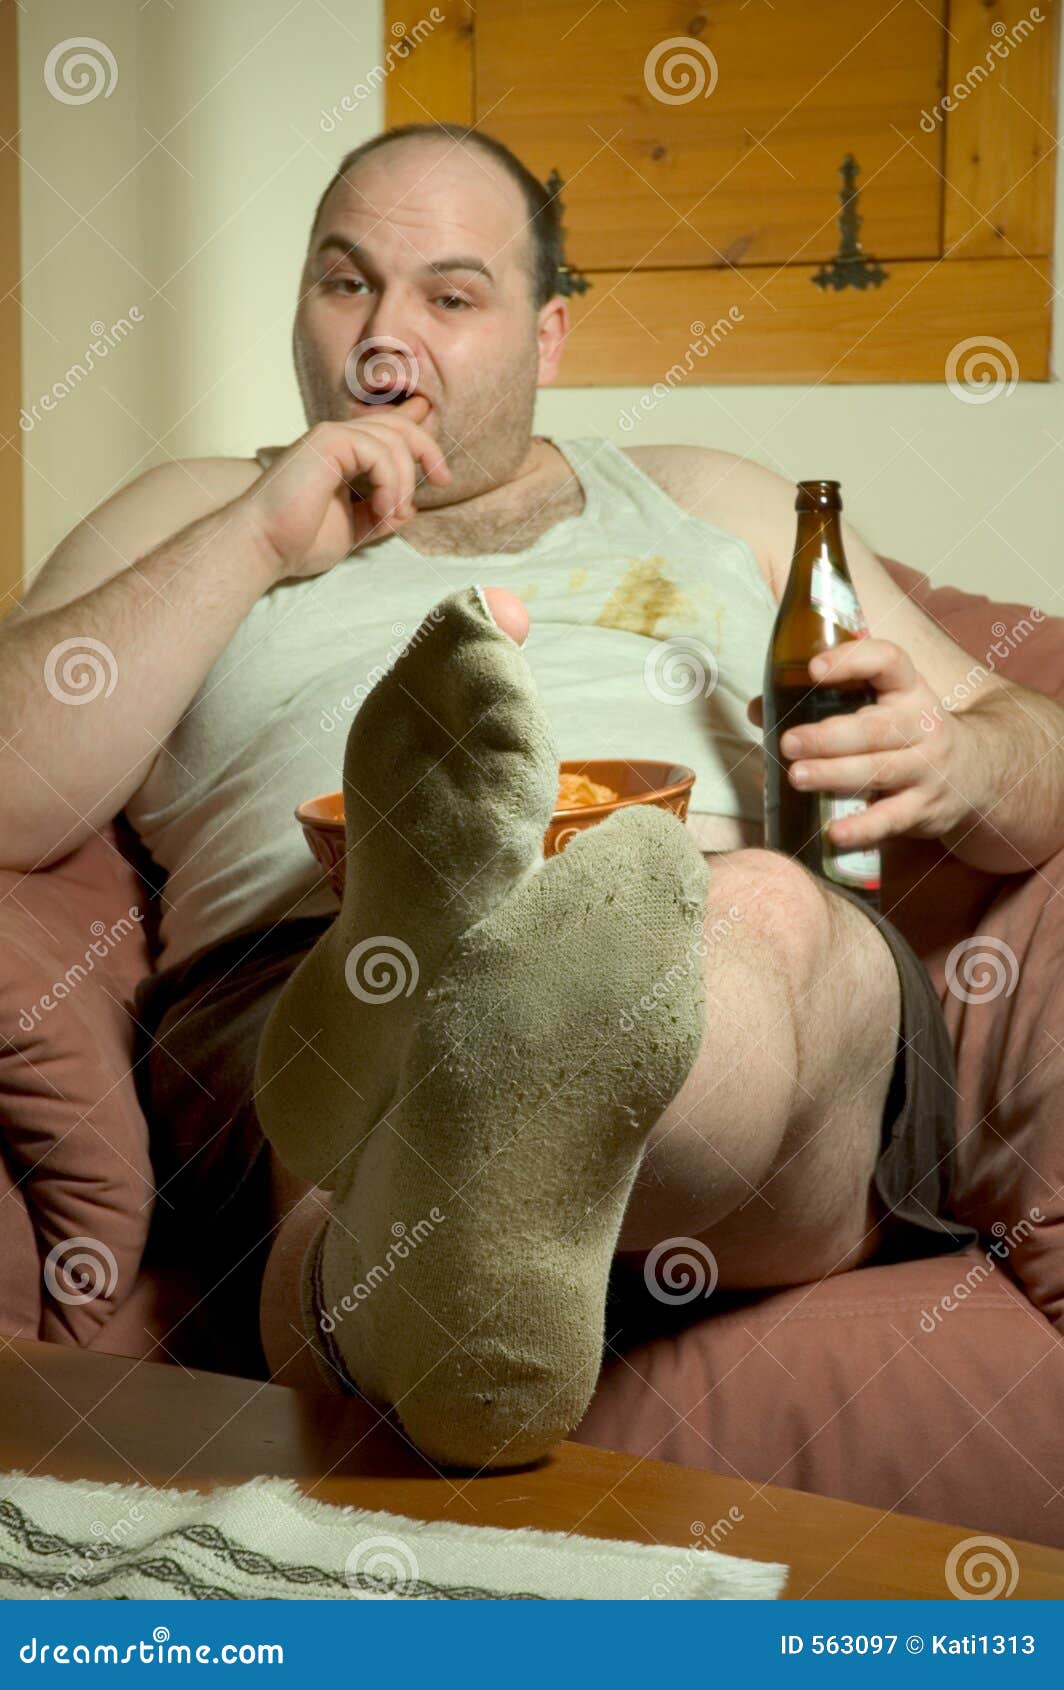 Couch potato stock image. Image of hideous, dirty, mouth - 563097